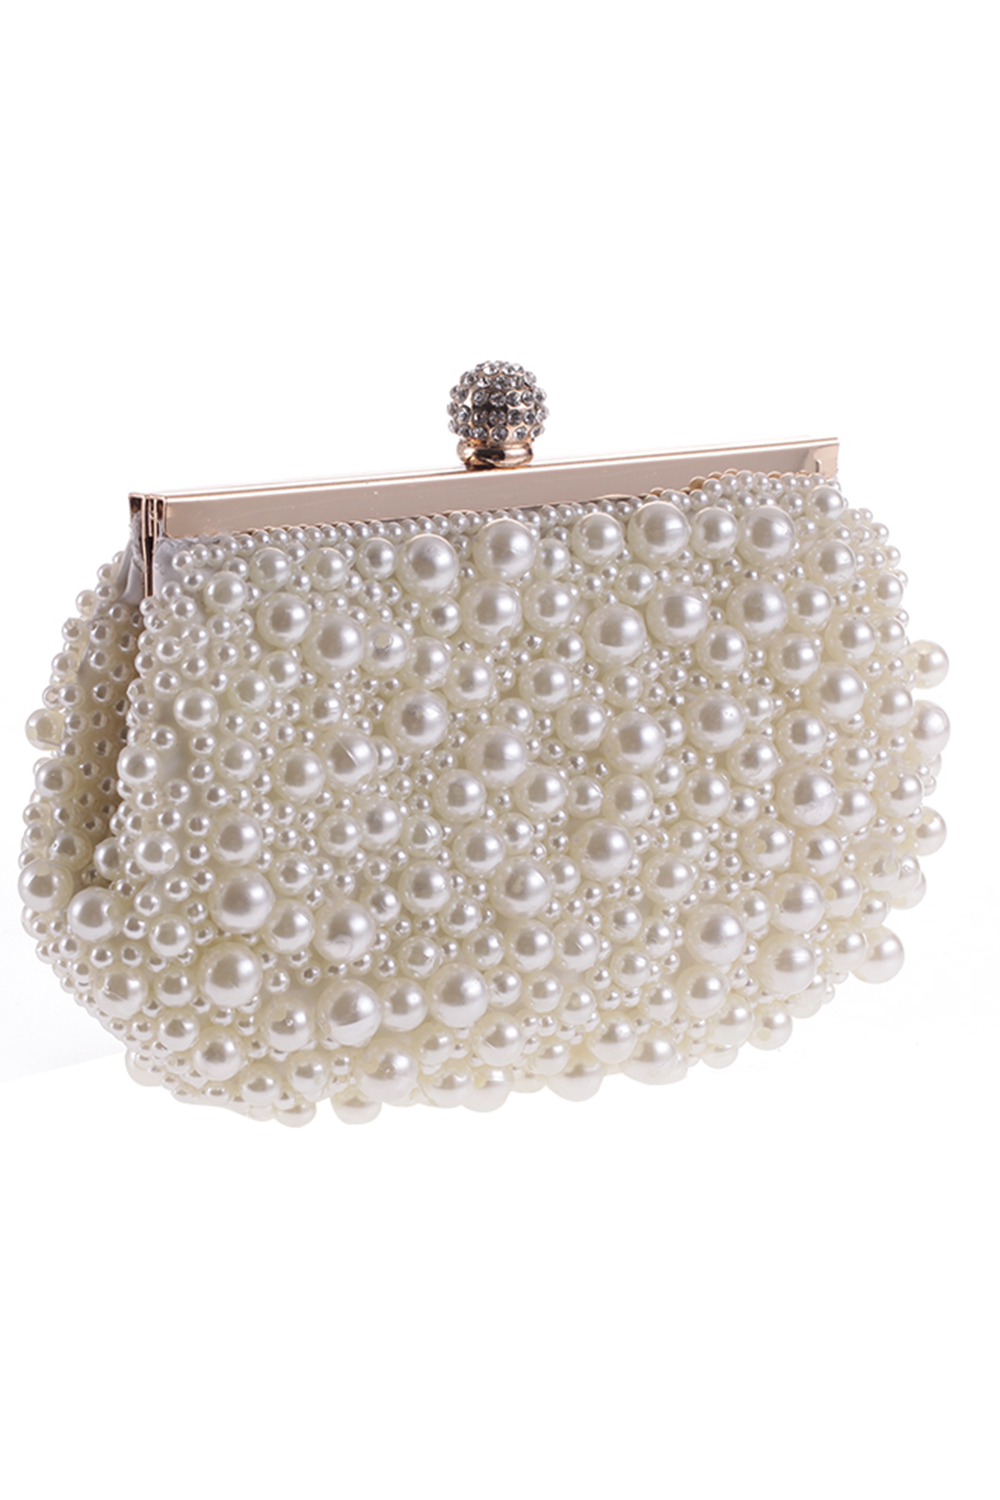 2017 Hot Cheap Crystal Pearls Bridal Bags with Chain Women Wedding Evening Prom Party Handbag Shoulder Bags Clutch Bags CPA960 от DHgate WW